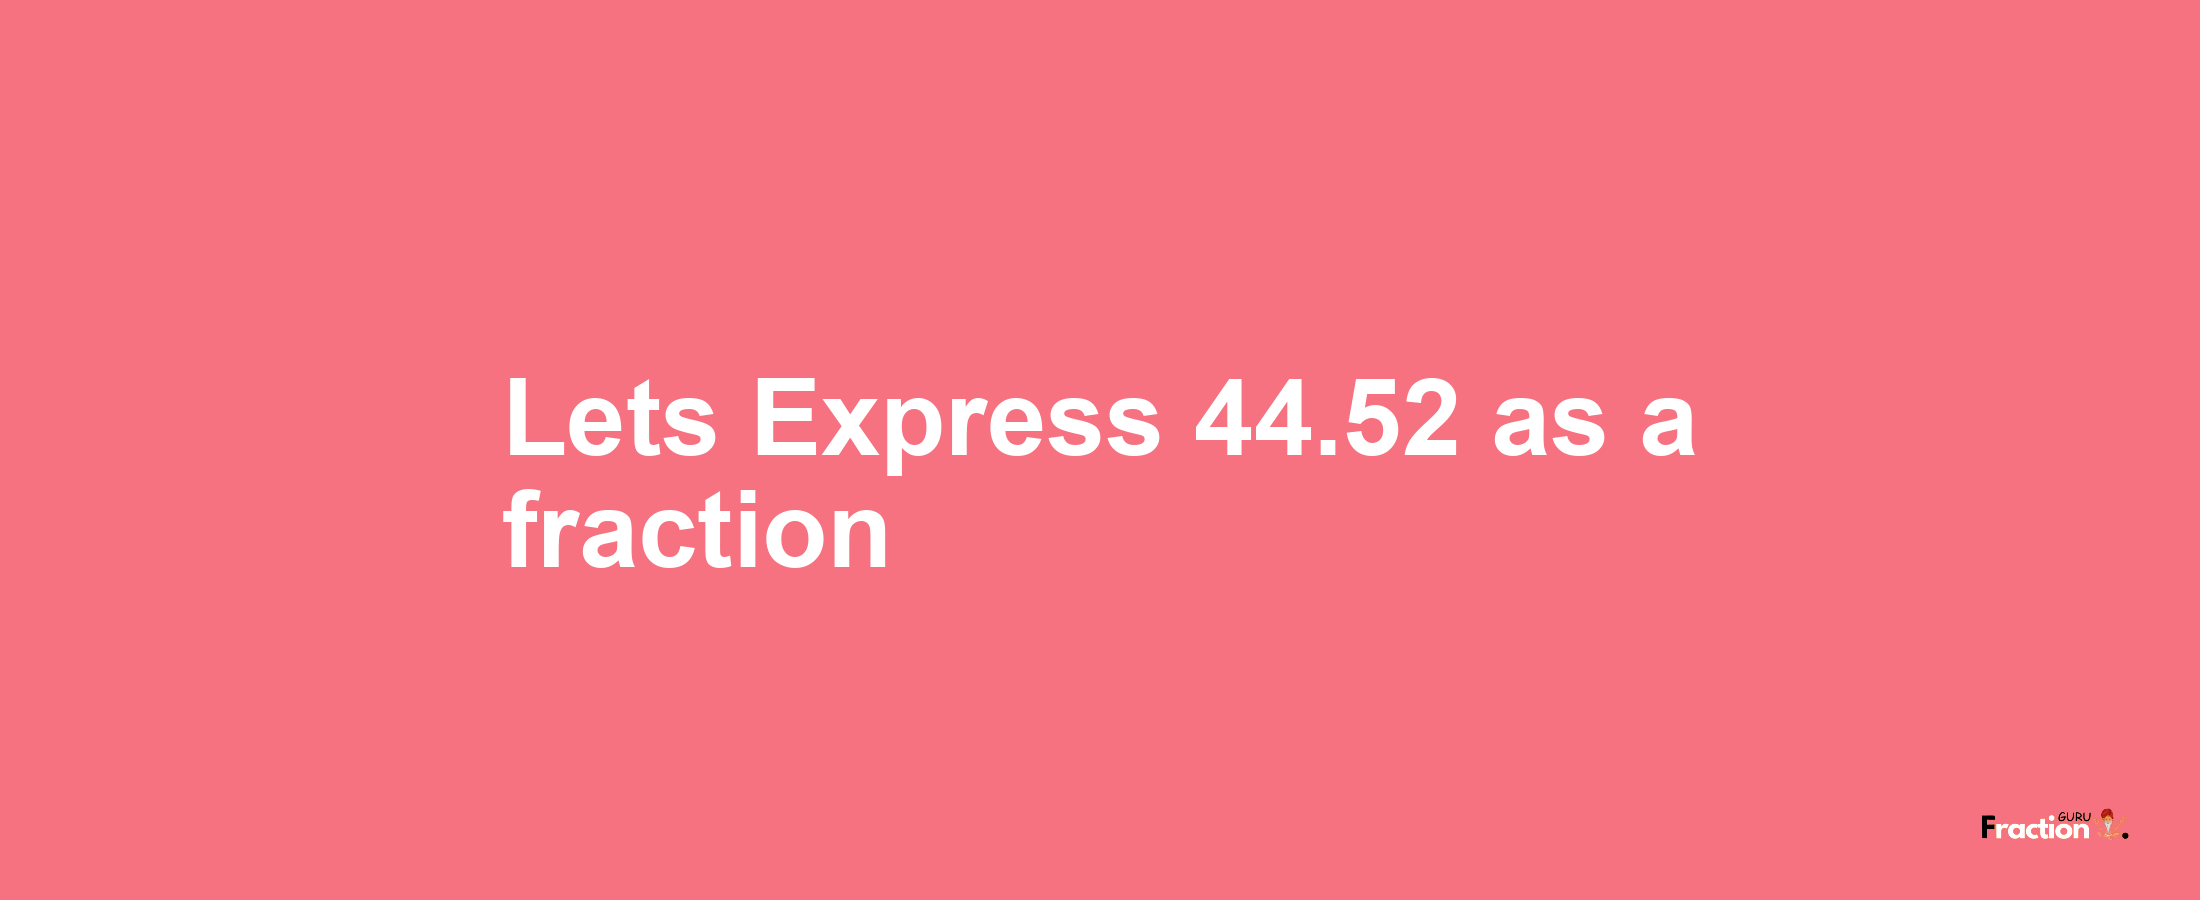 Lets Express 44.52 as afraction